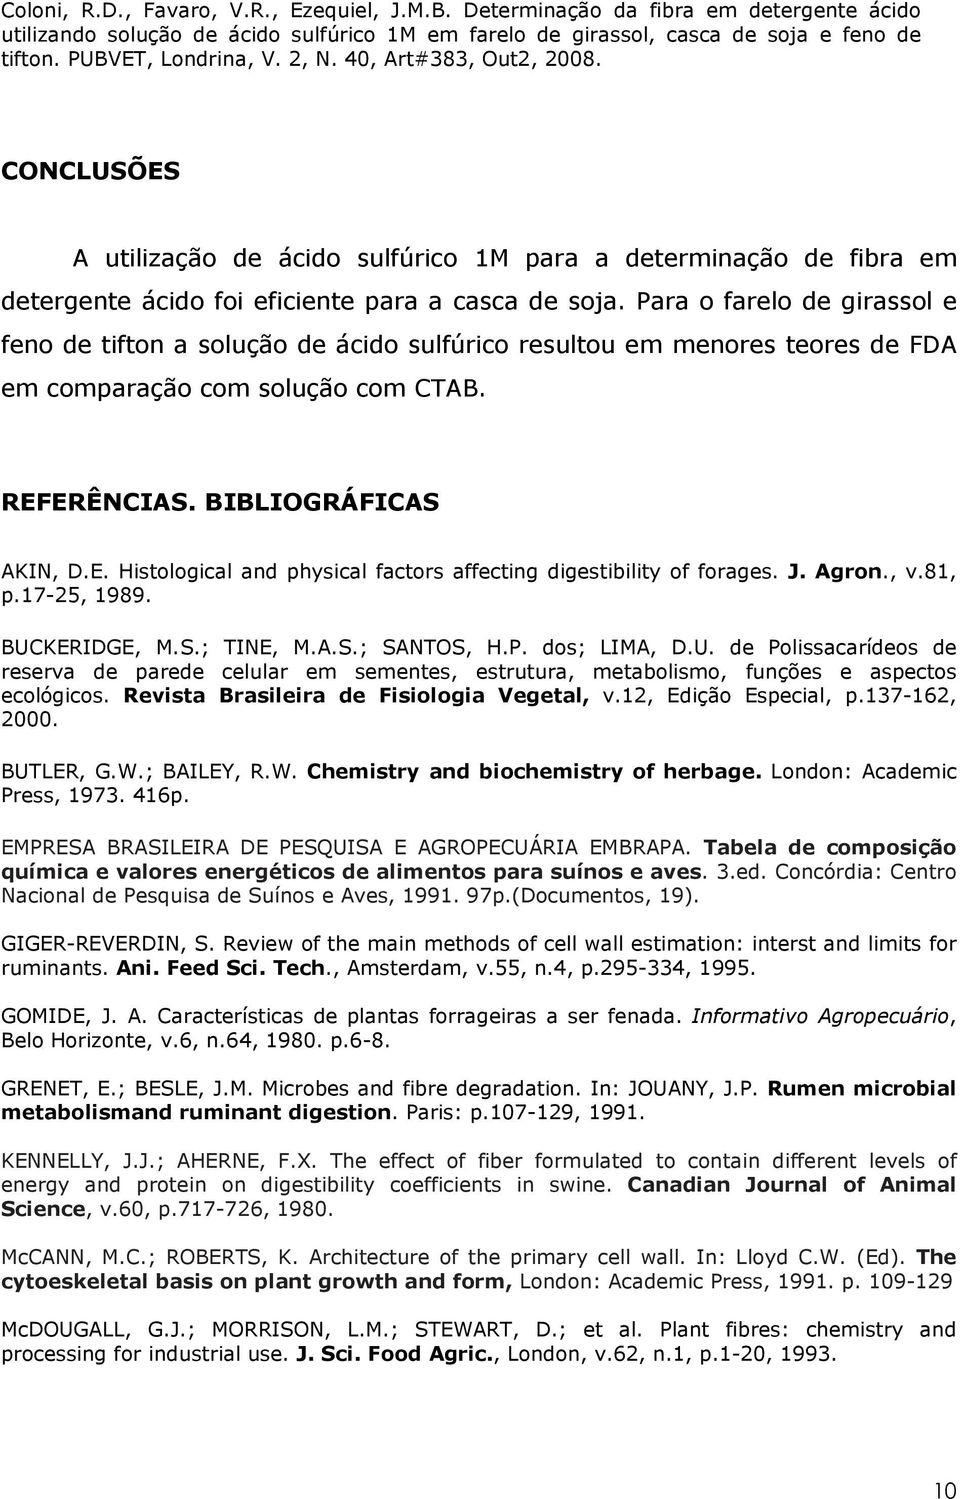 ERÊNCIAS. BIBLIOGRÁFICAS AKIN, D.E. Histological and physical factors affecting digestibility of forages. J. Agron., v.81, p.17-25, 1989. BUC